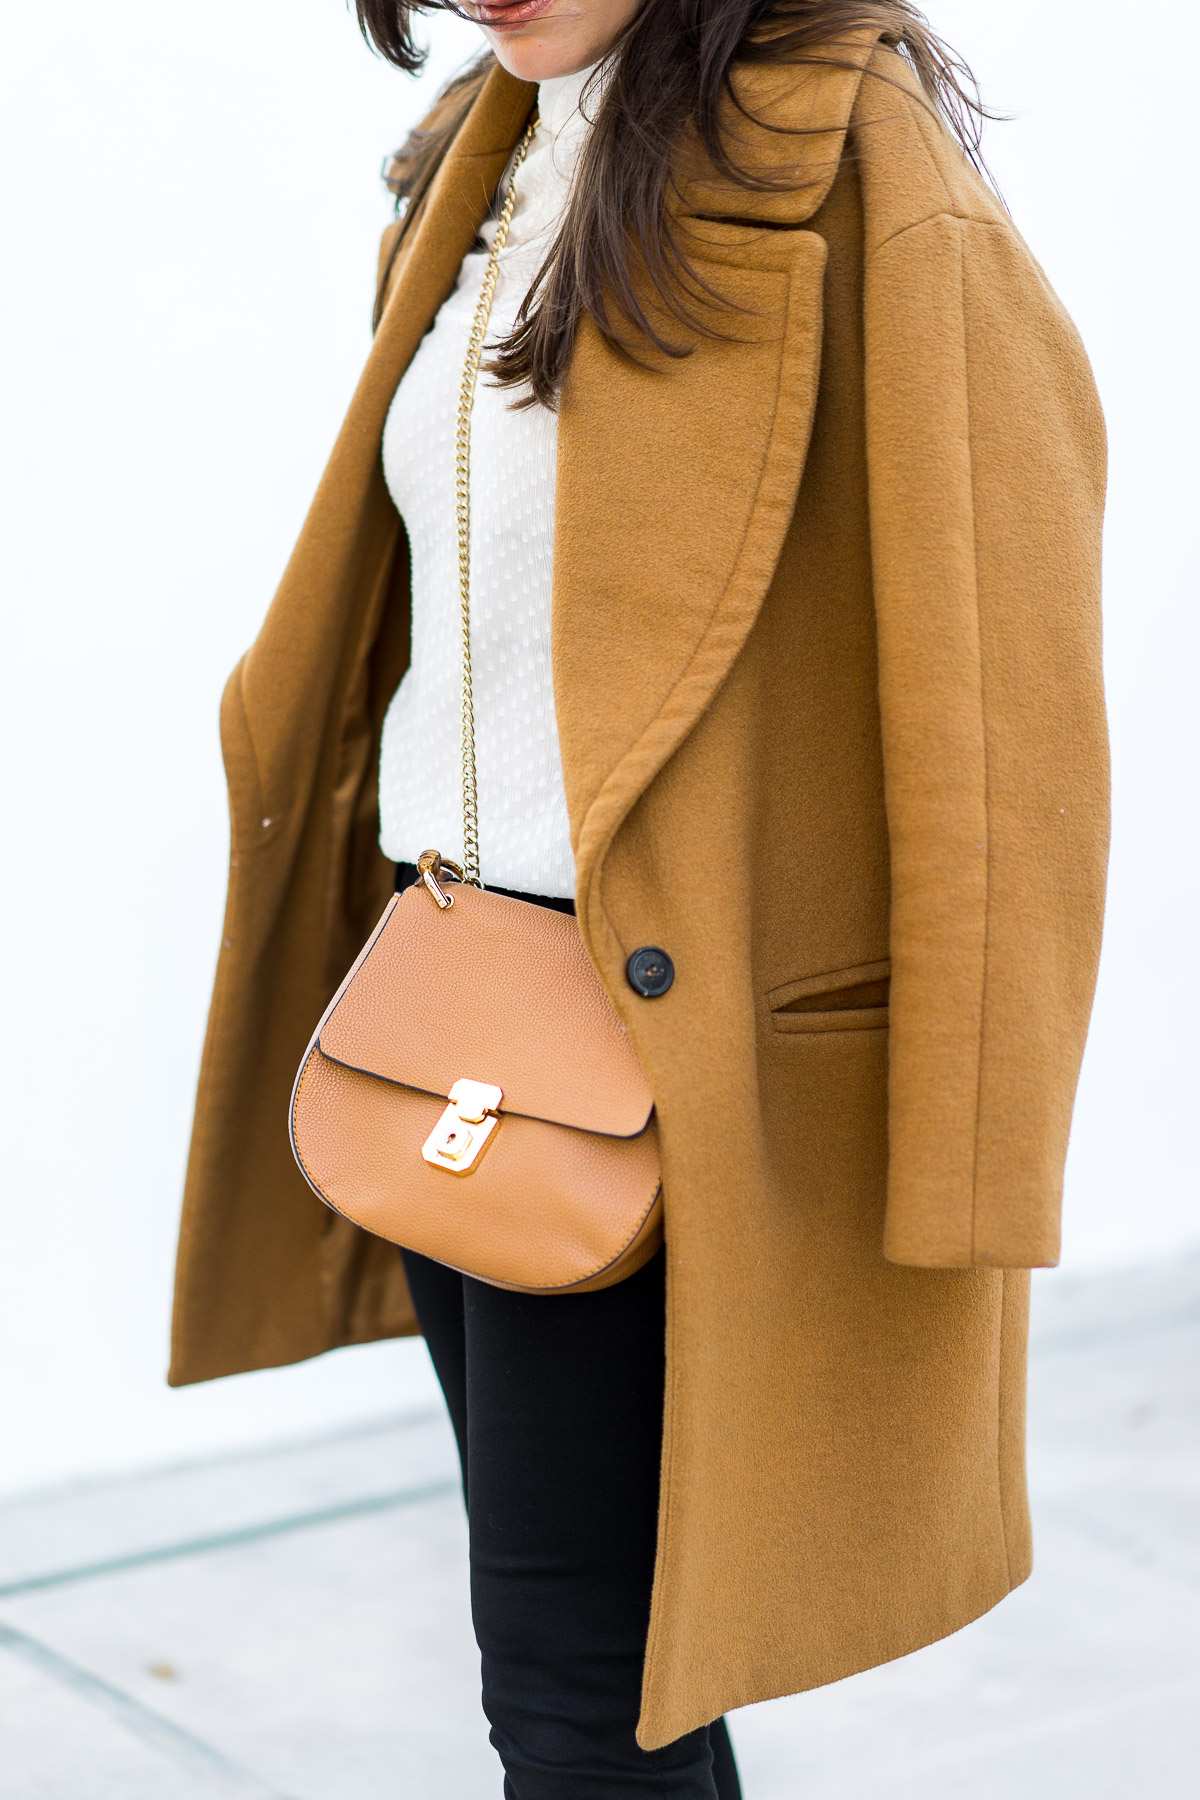 South Florida blogger Amanda shares her classic tan coat by Zara with Chloe Drew dupe bag on her blog A Glam Lifestyle